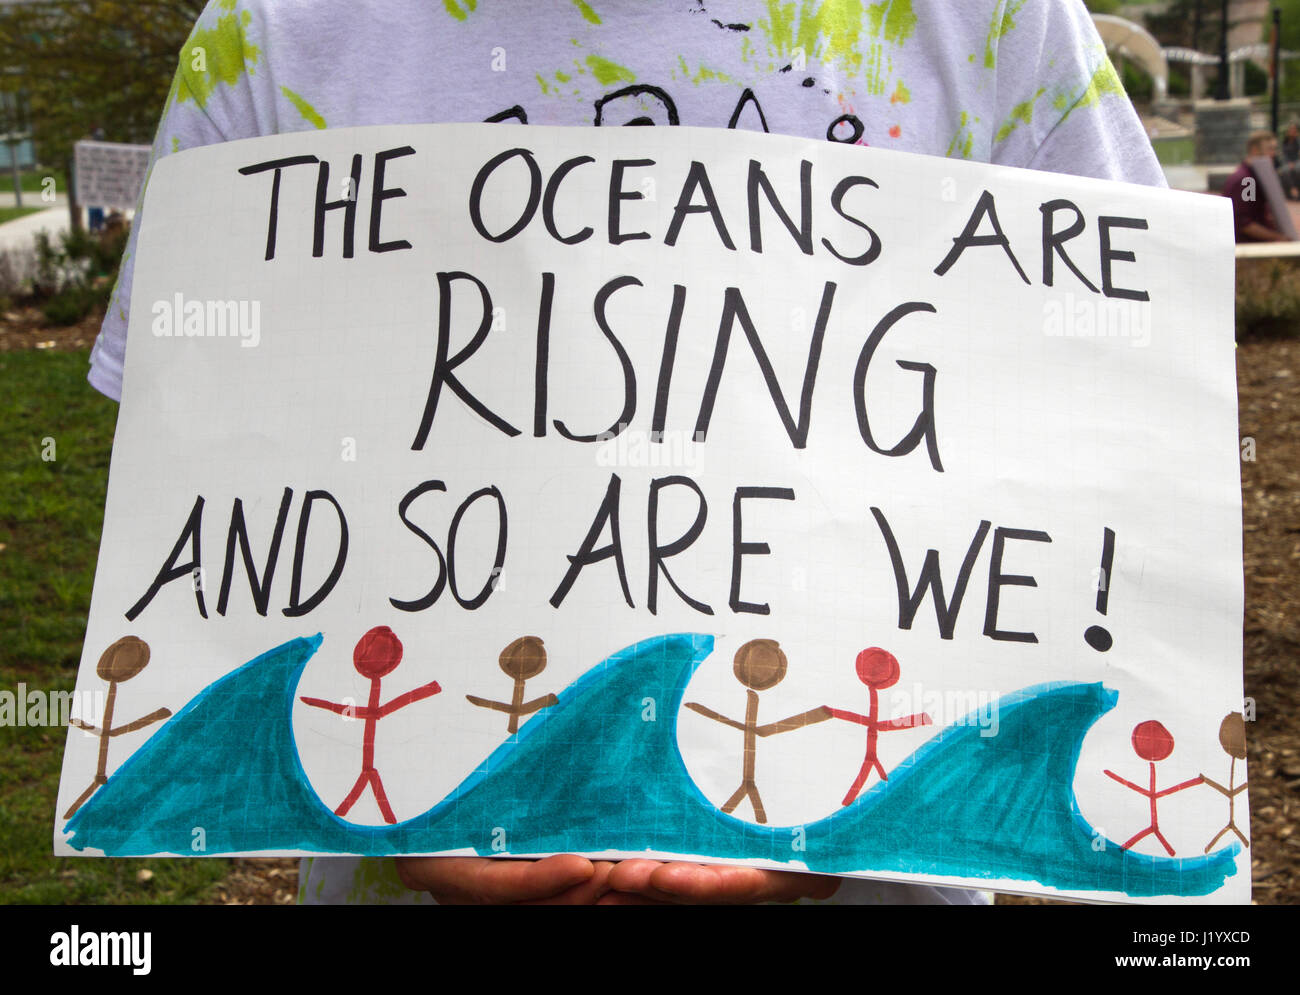 Asheville, North Carolina, USA: April 22, 2017 - Close up of an activist's political sign that says 'The Oceans Are Rising and So Are We' at the 2017 Earth Day March For Science rally protesting current Trump and GOP policies. Asheville, NC. Stock Photo